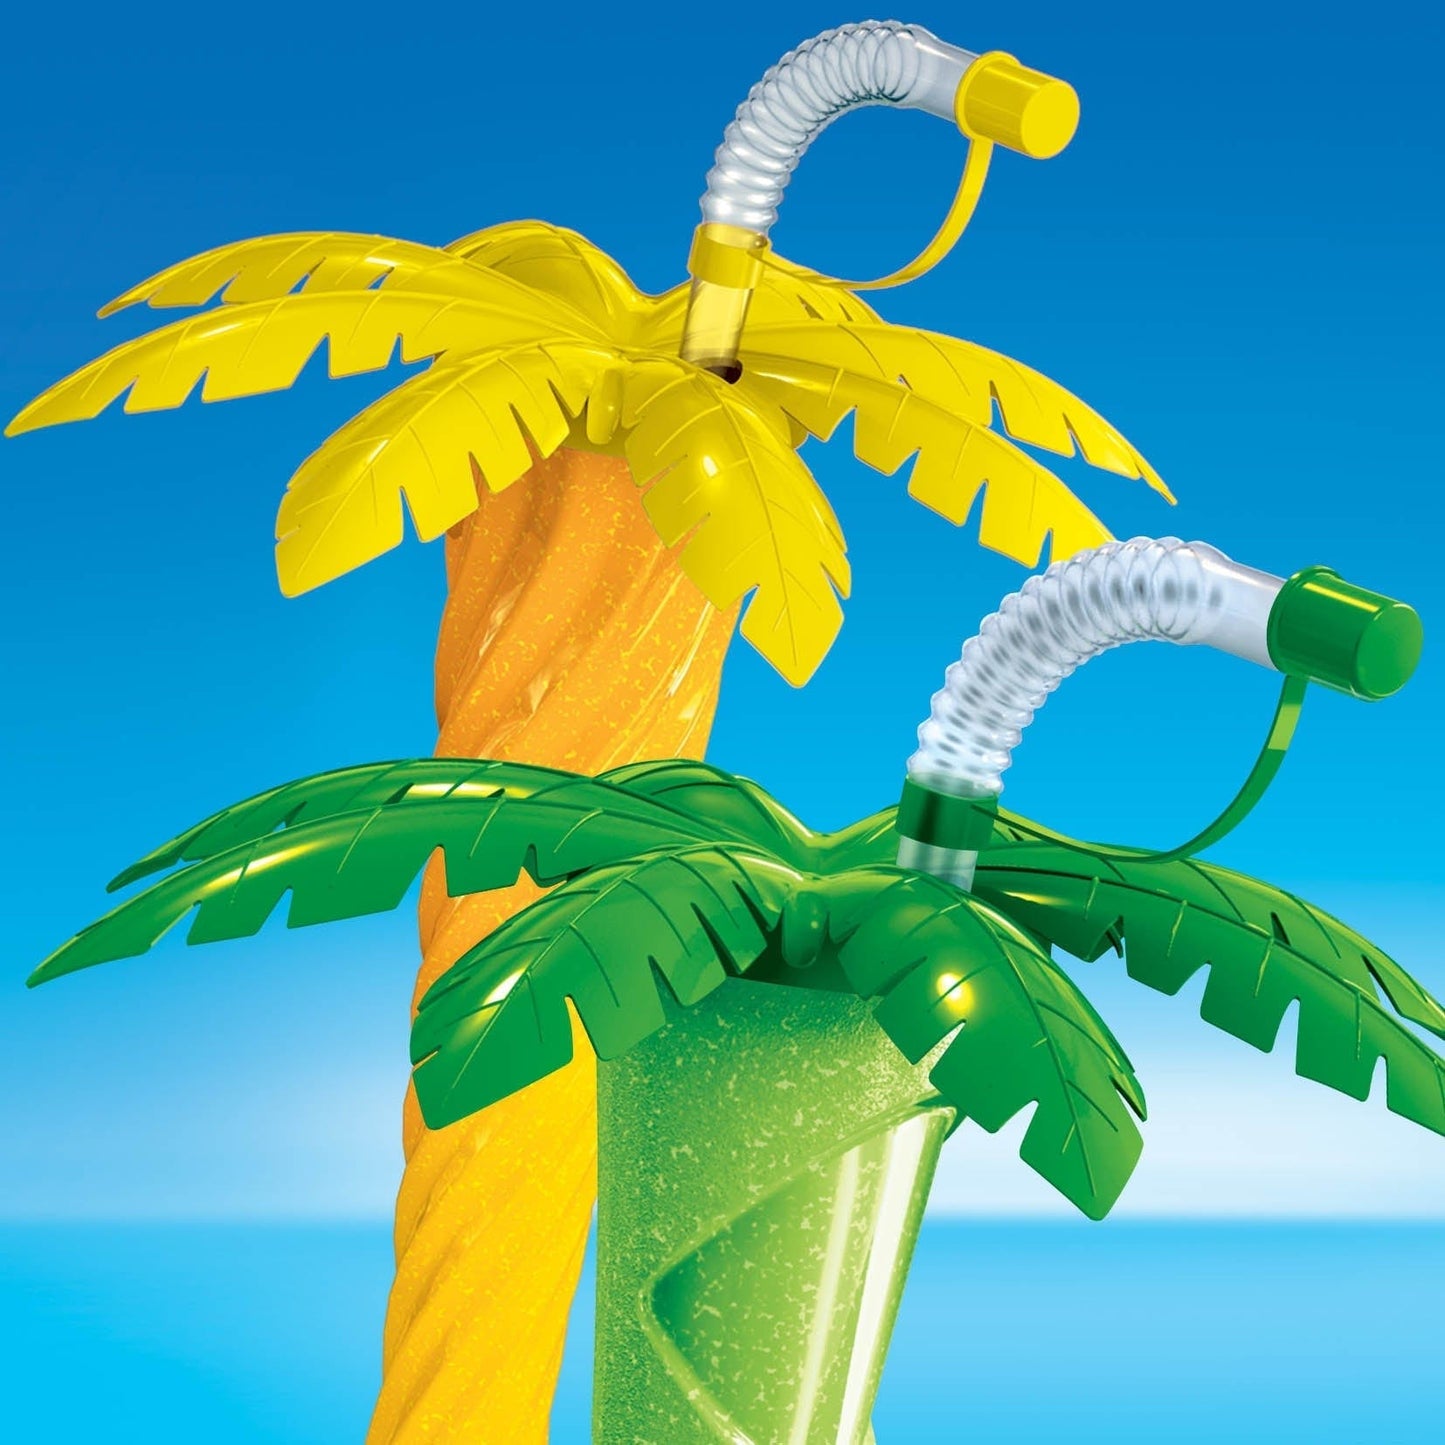 Sweet World USA Yard Cups Palm Cup Palm Tree Luau Yard Cups (108 cups) - for Margaritas, Cold Drinks, Frozen Drinks, Kids Parties - 9 oz. (250 ml) - Yellow cups with lids and straws